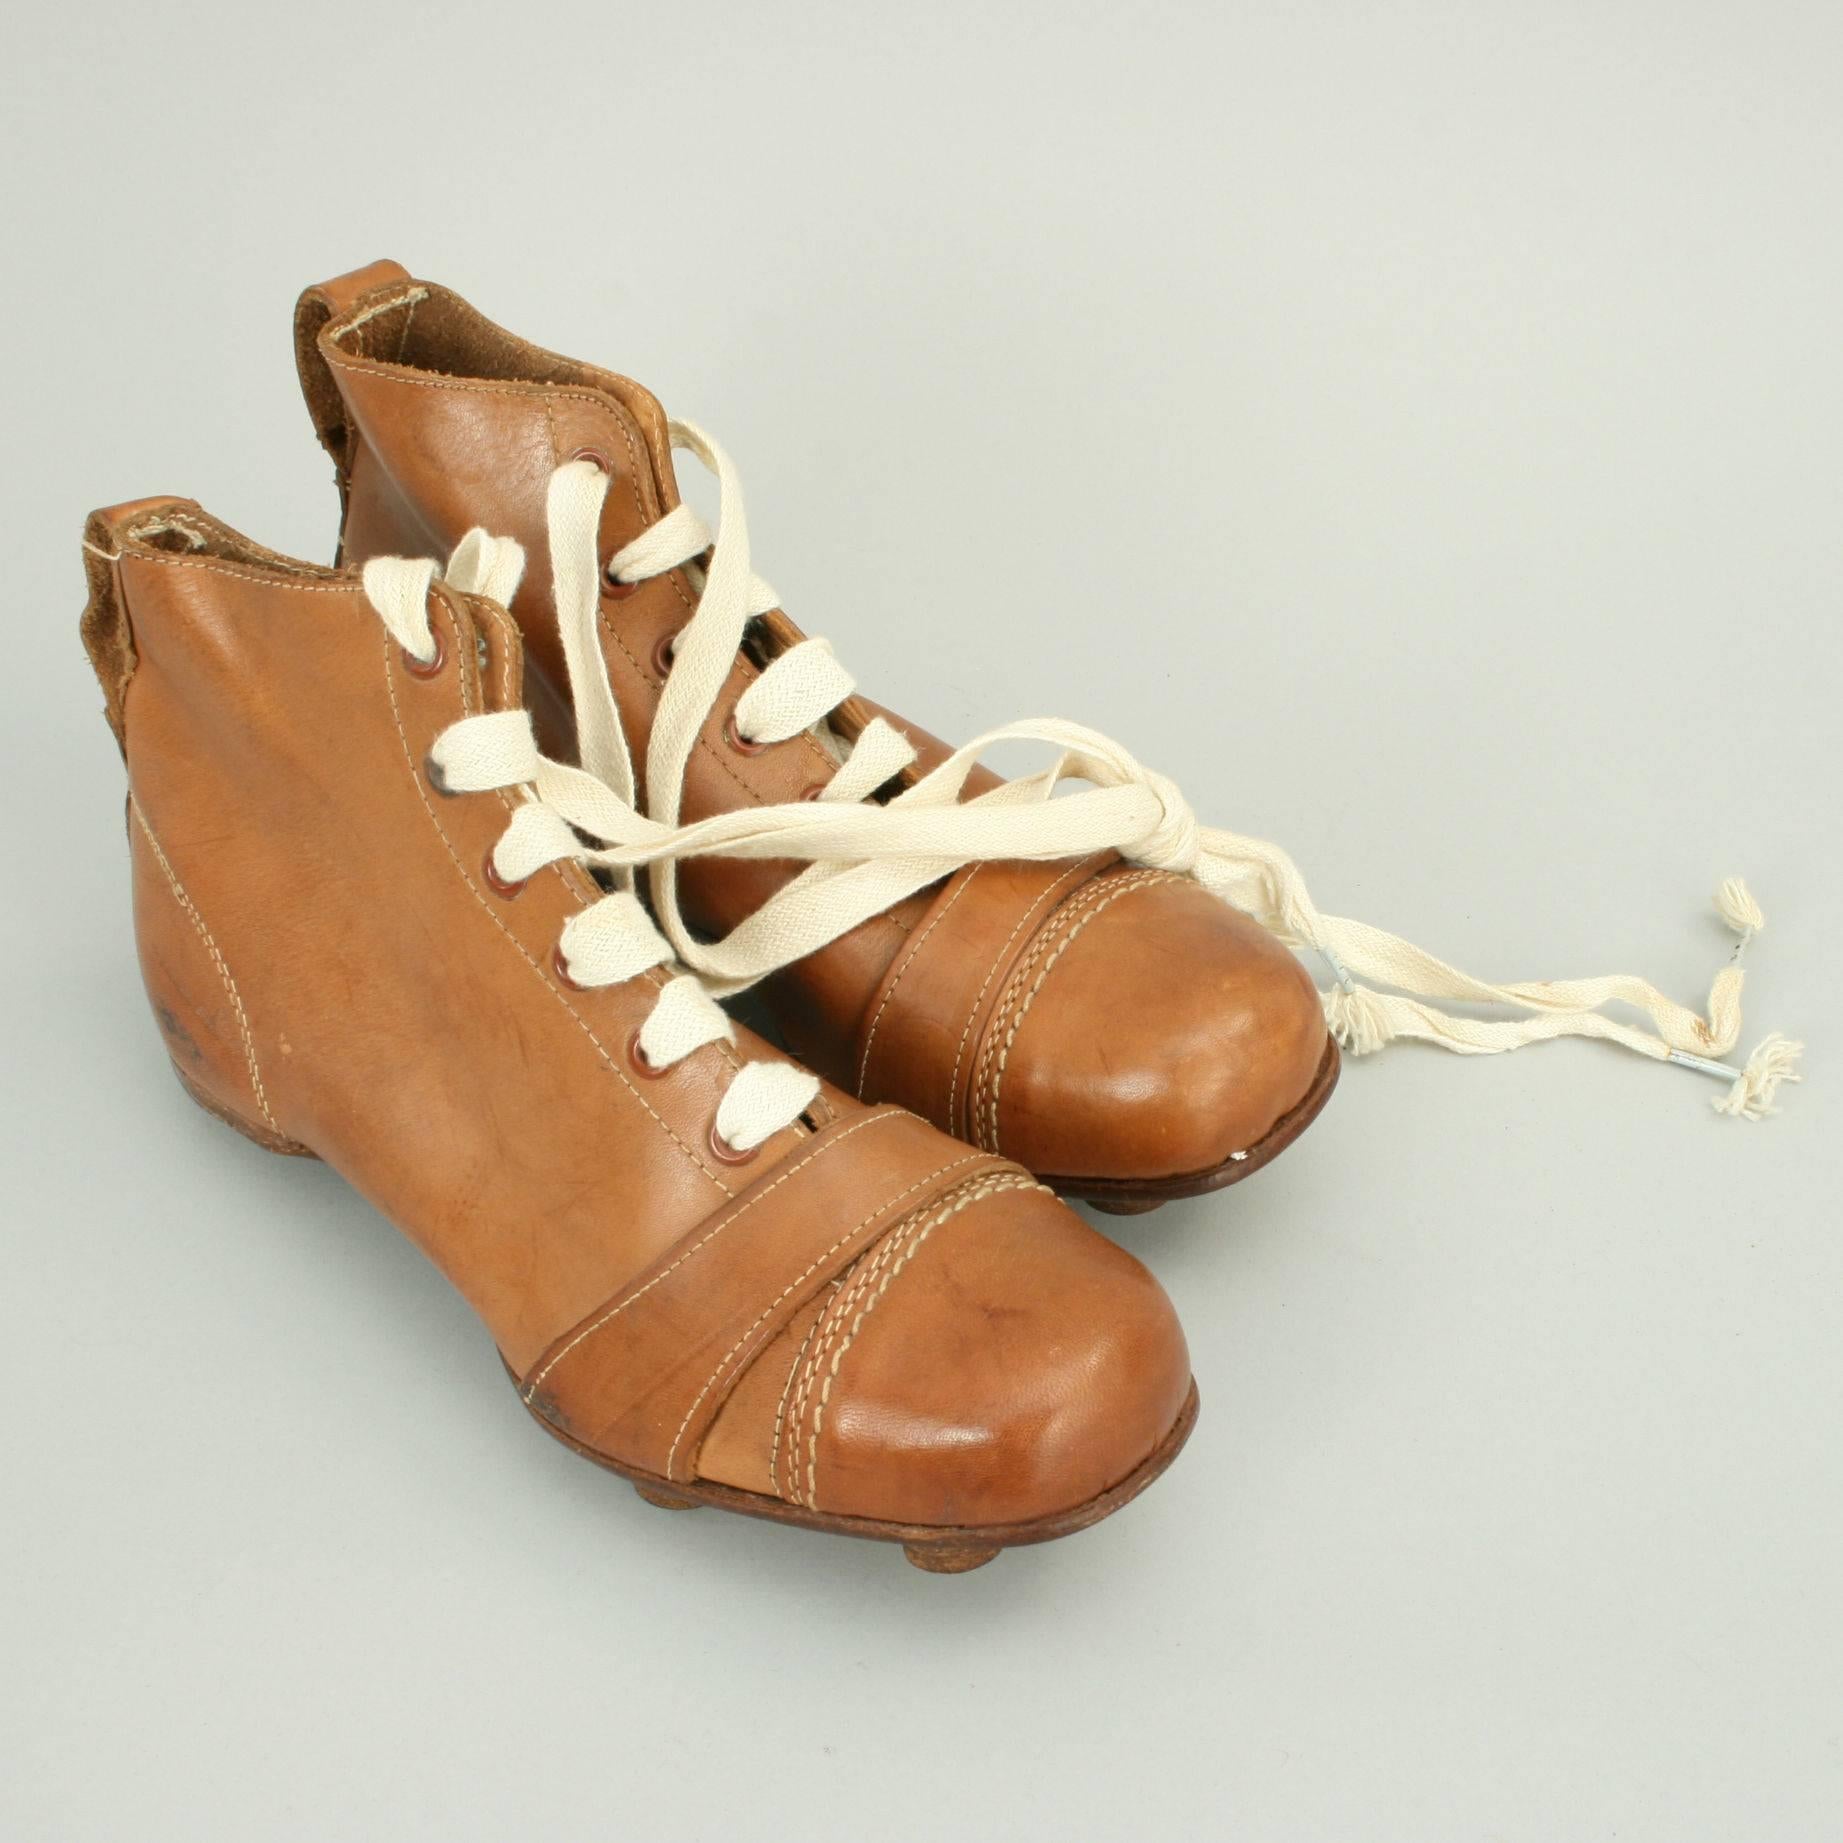 British Leather Football Boots